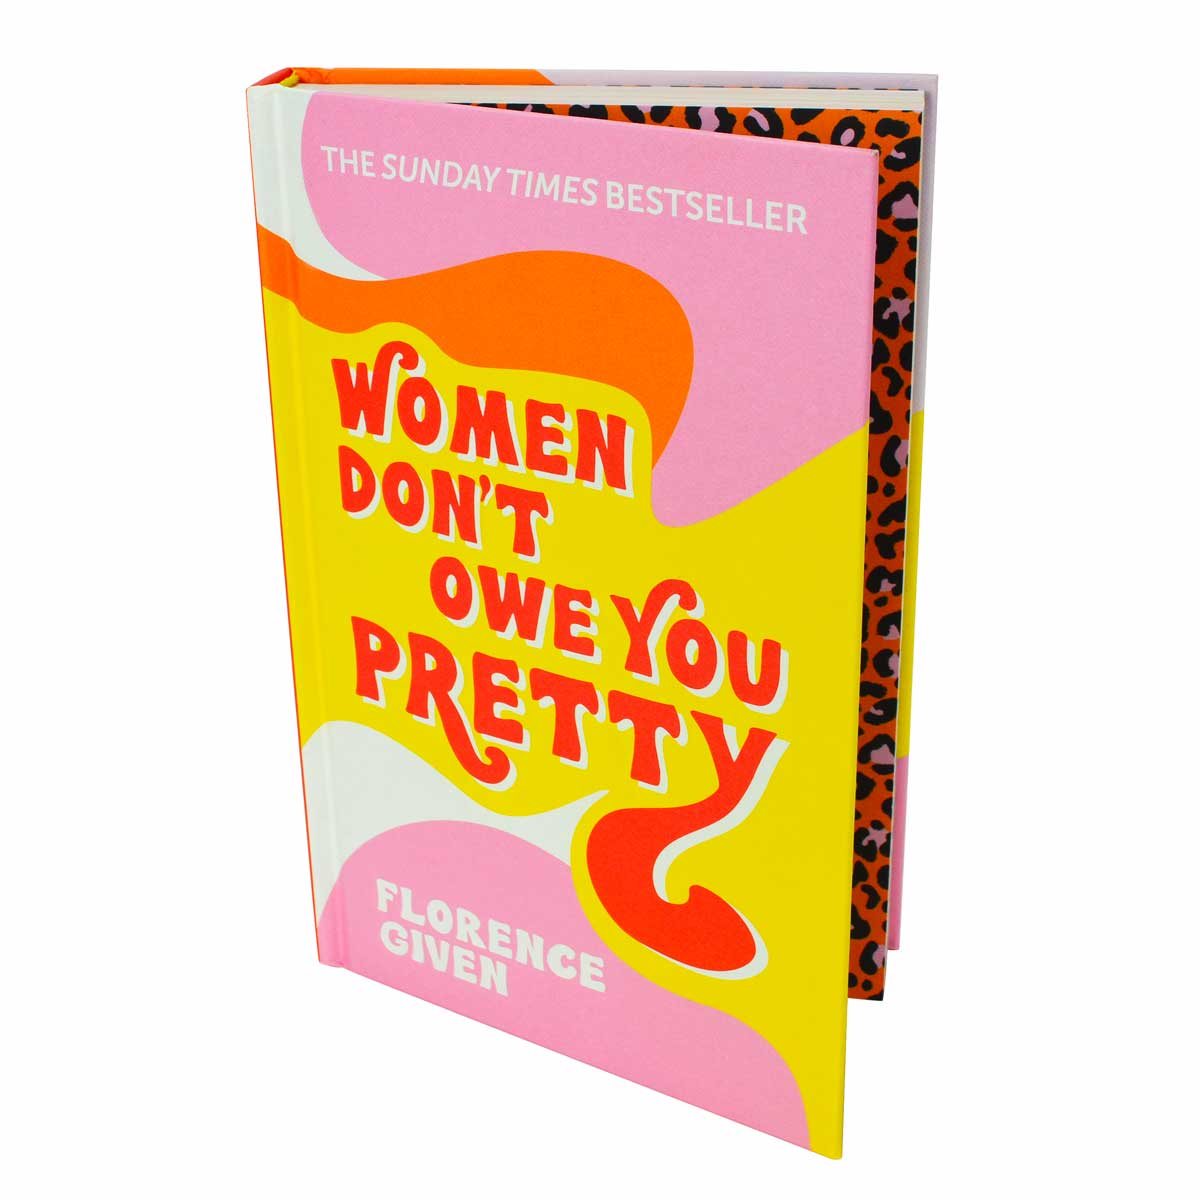 Women Dont Owe You Pretty By Florence Given Waterstones 